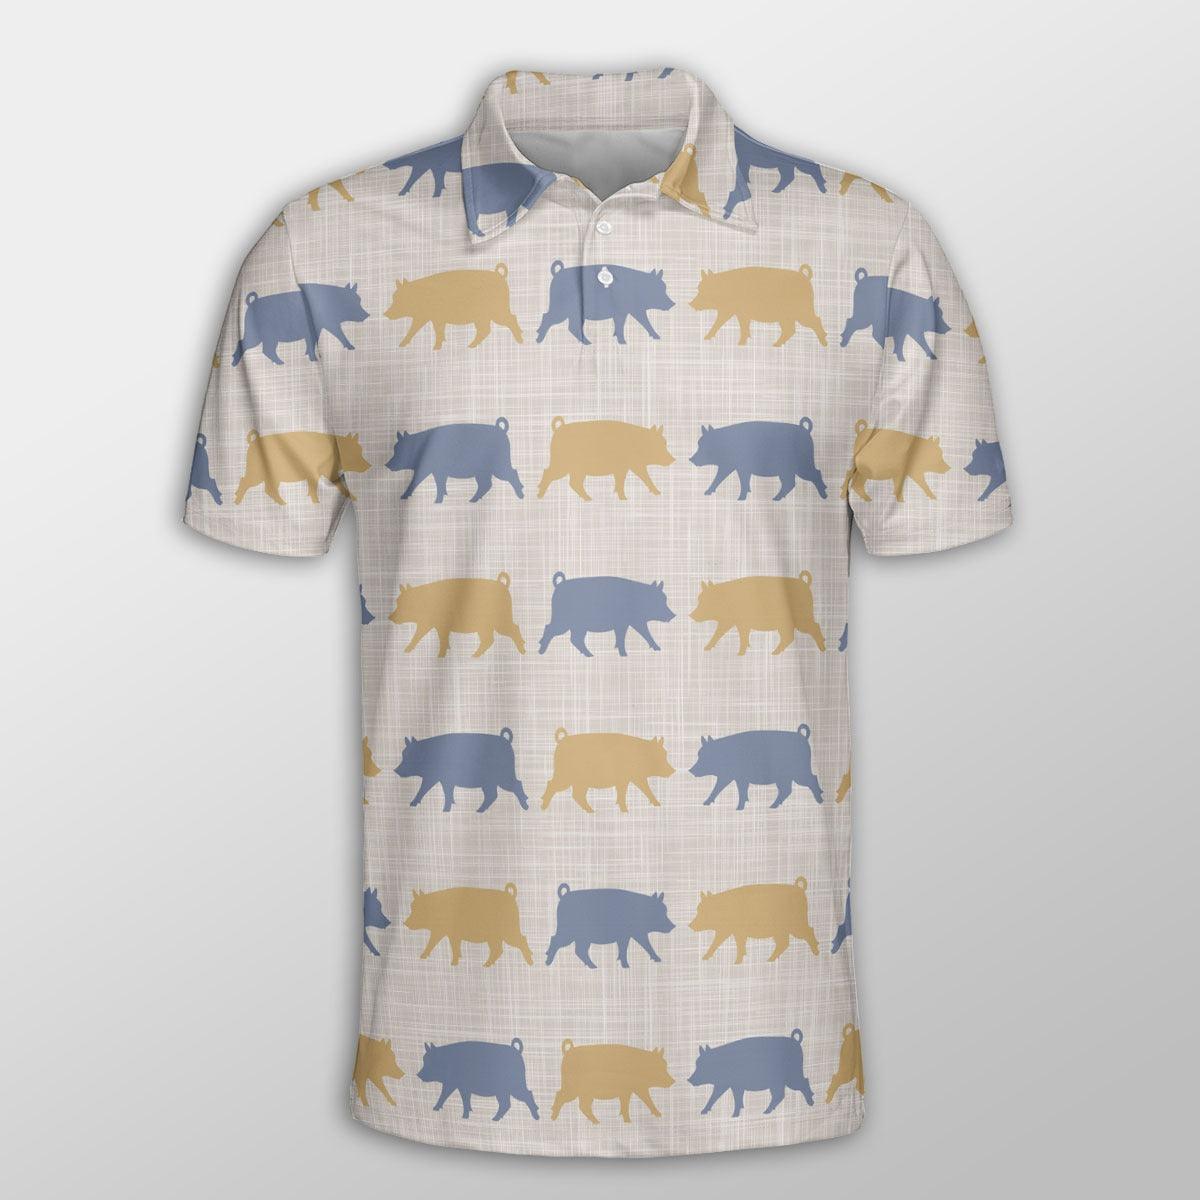 Pig Men Polo Shirt For Summer - Pig Silhouette Pattern Button Shirt For Men - Perfect Gift For Pig Lovers, Cattle Lovers - Amzanimalsgift